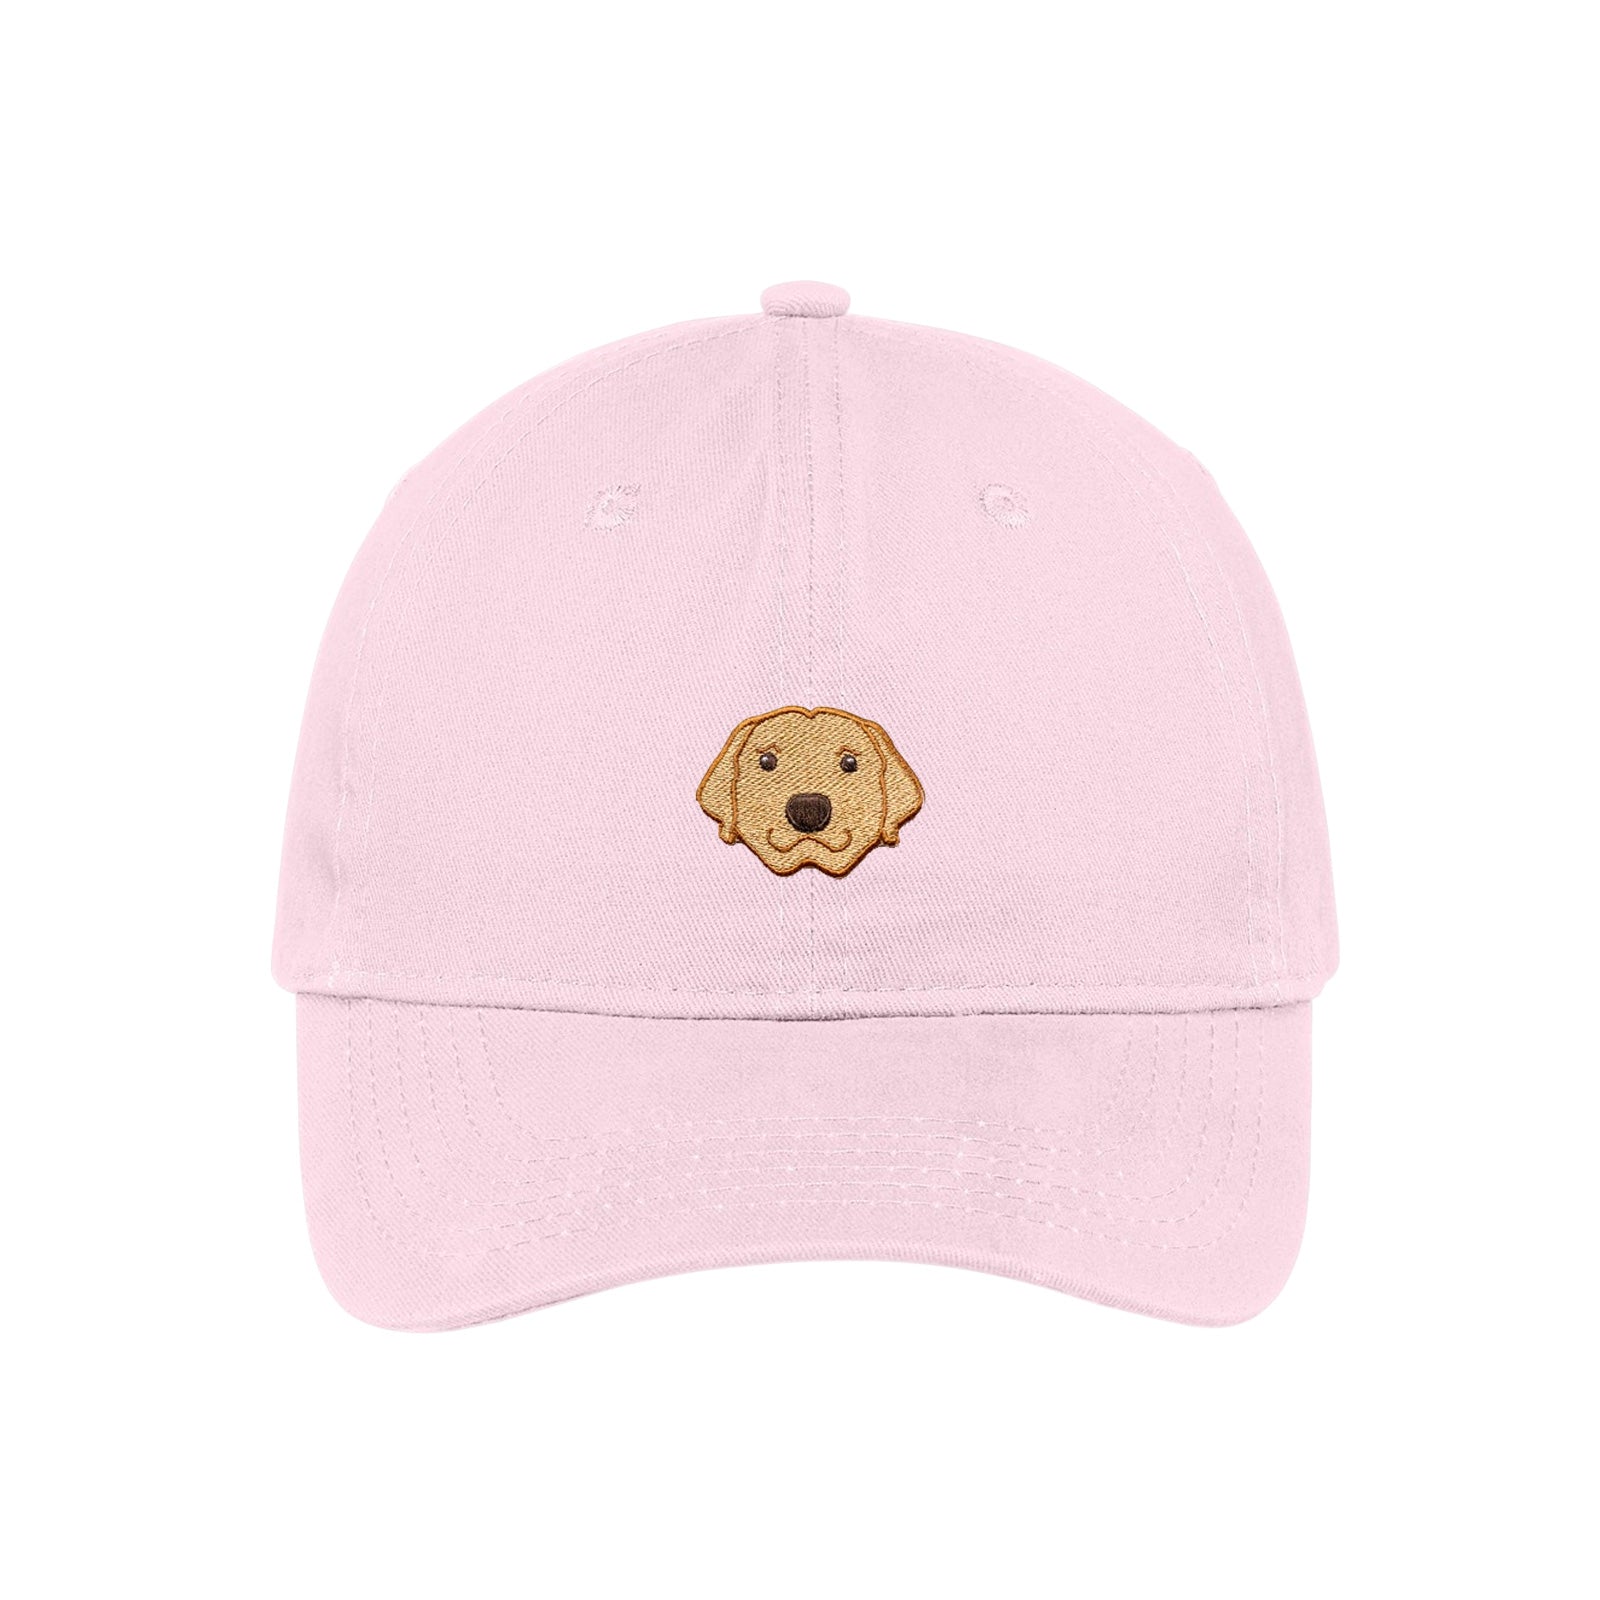 Pink custom dog dad hats customized with your dog's face embroidered on the front.